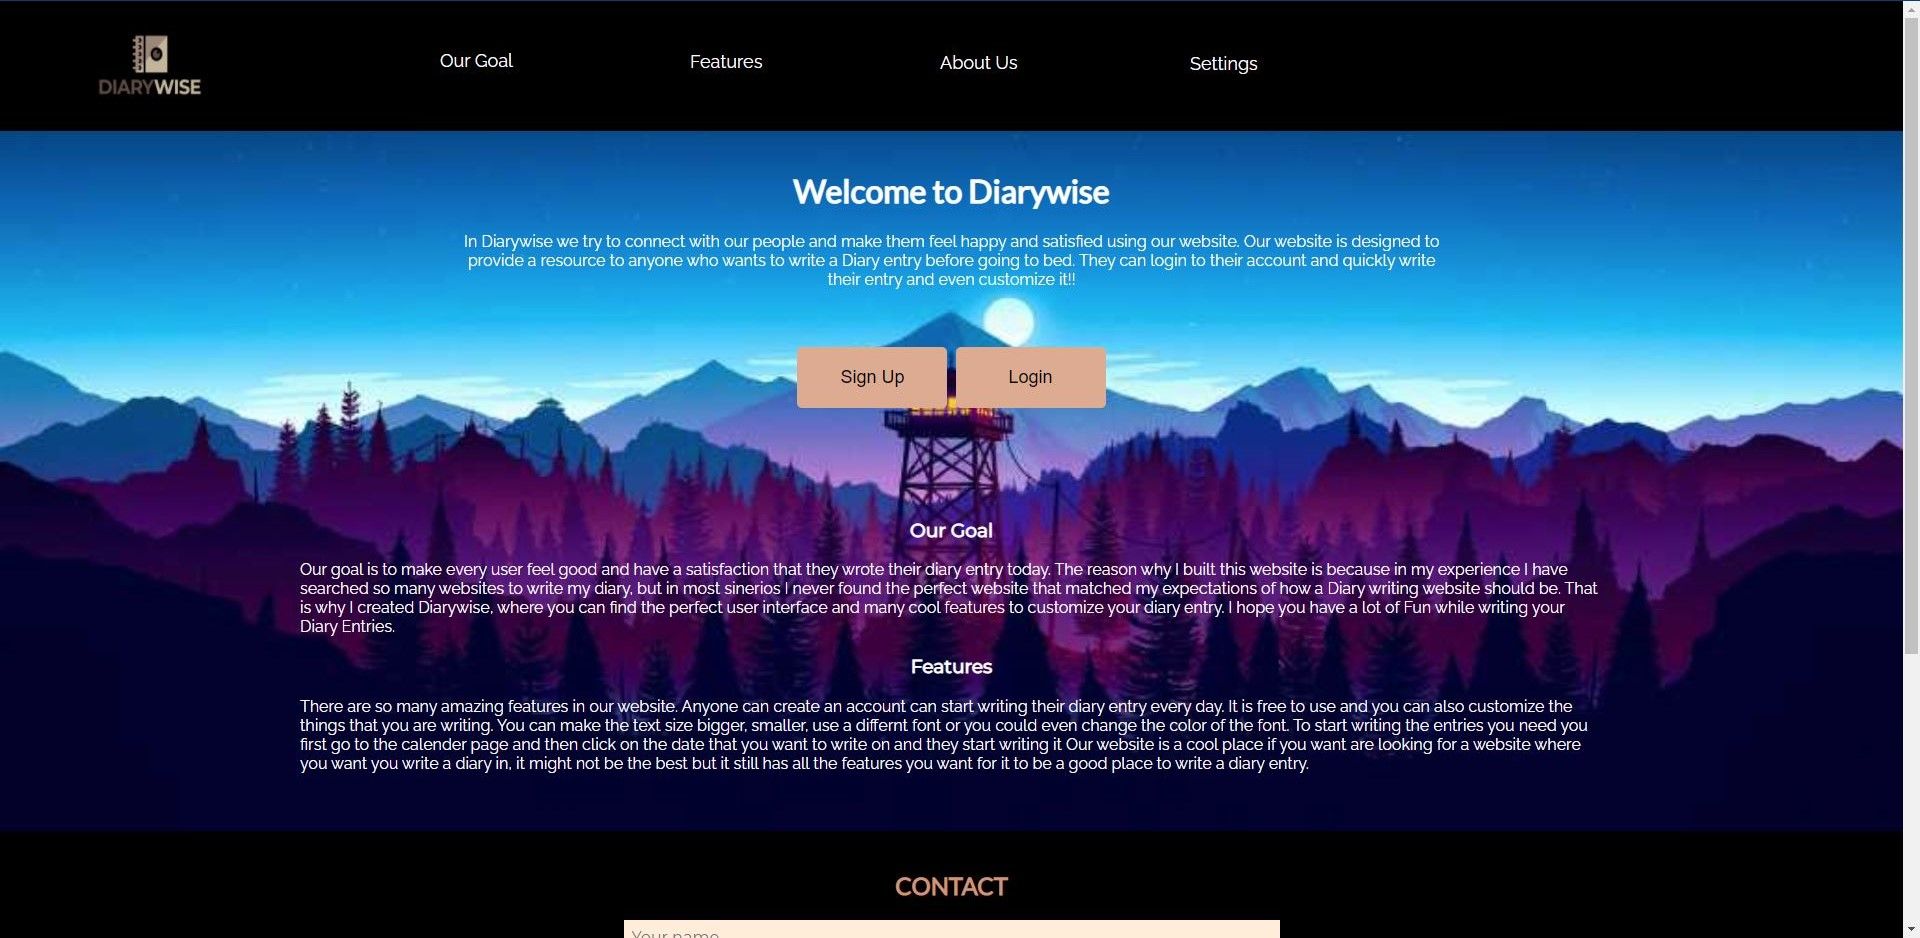 What is Diarywise?